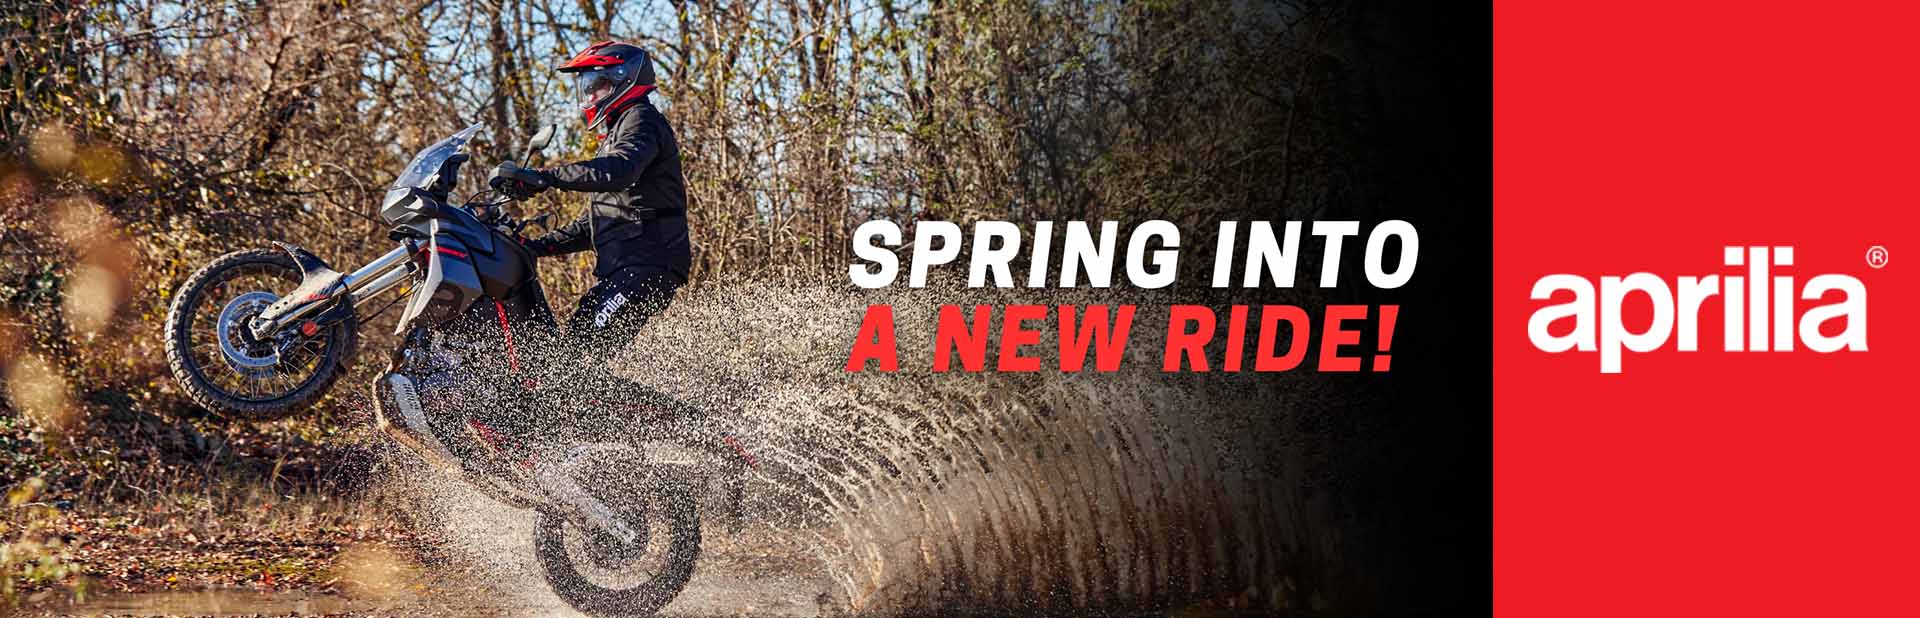 Spring Into A New Ride!